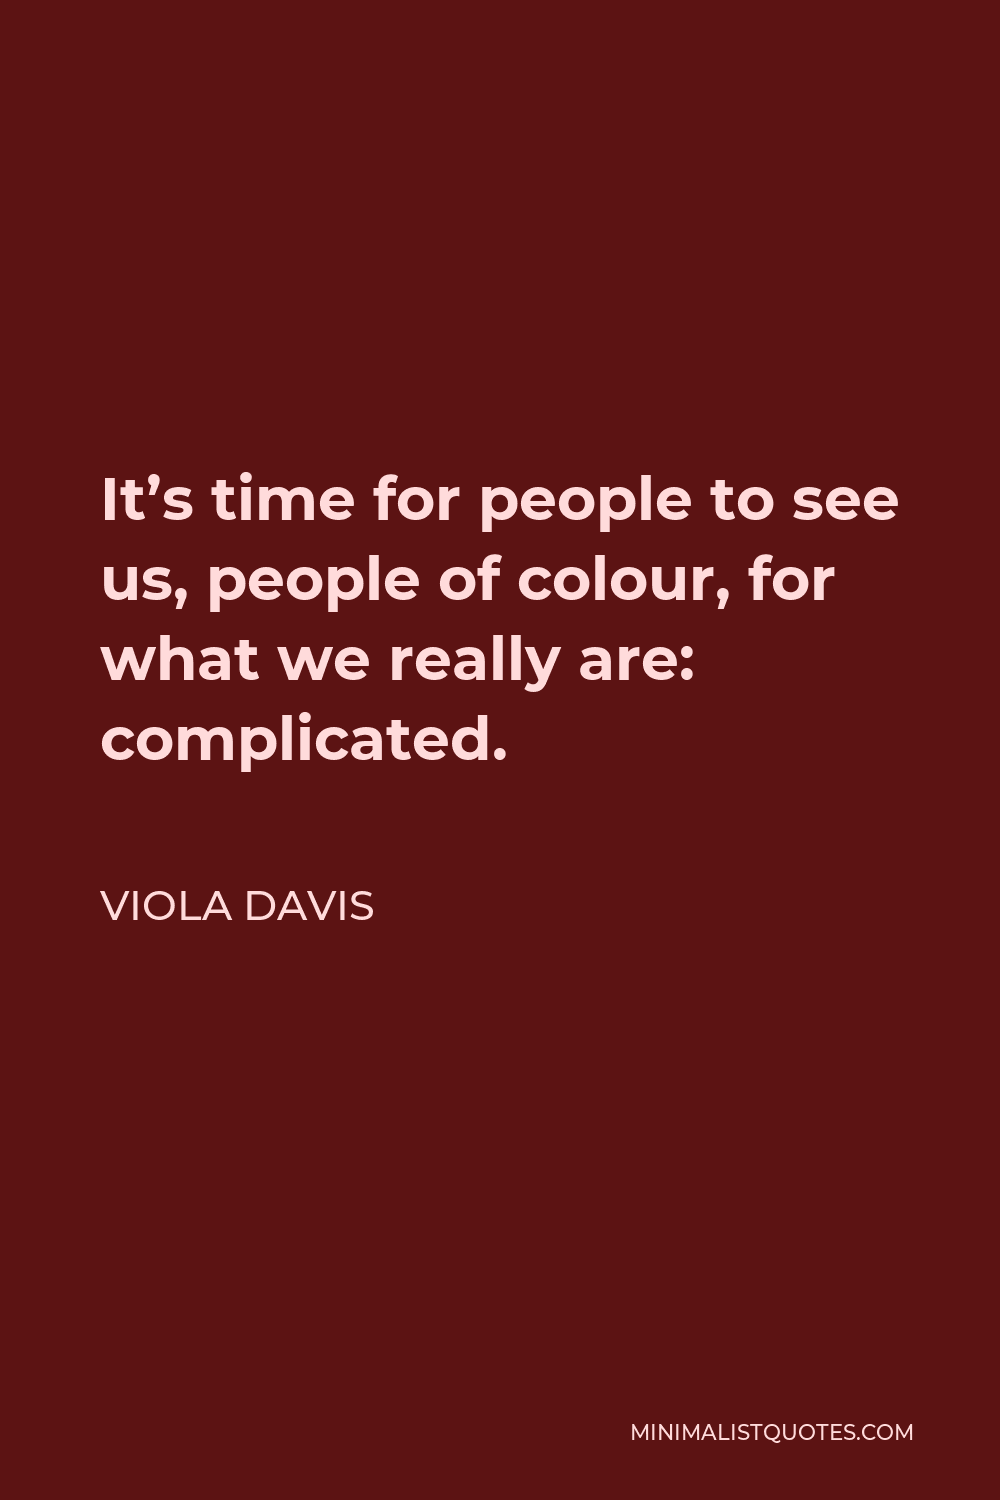 Viola Davis Quote - It’s time for people to see us, people of colour, for what we really are: complicated.